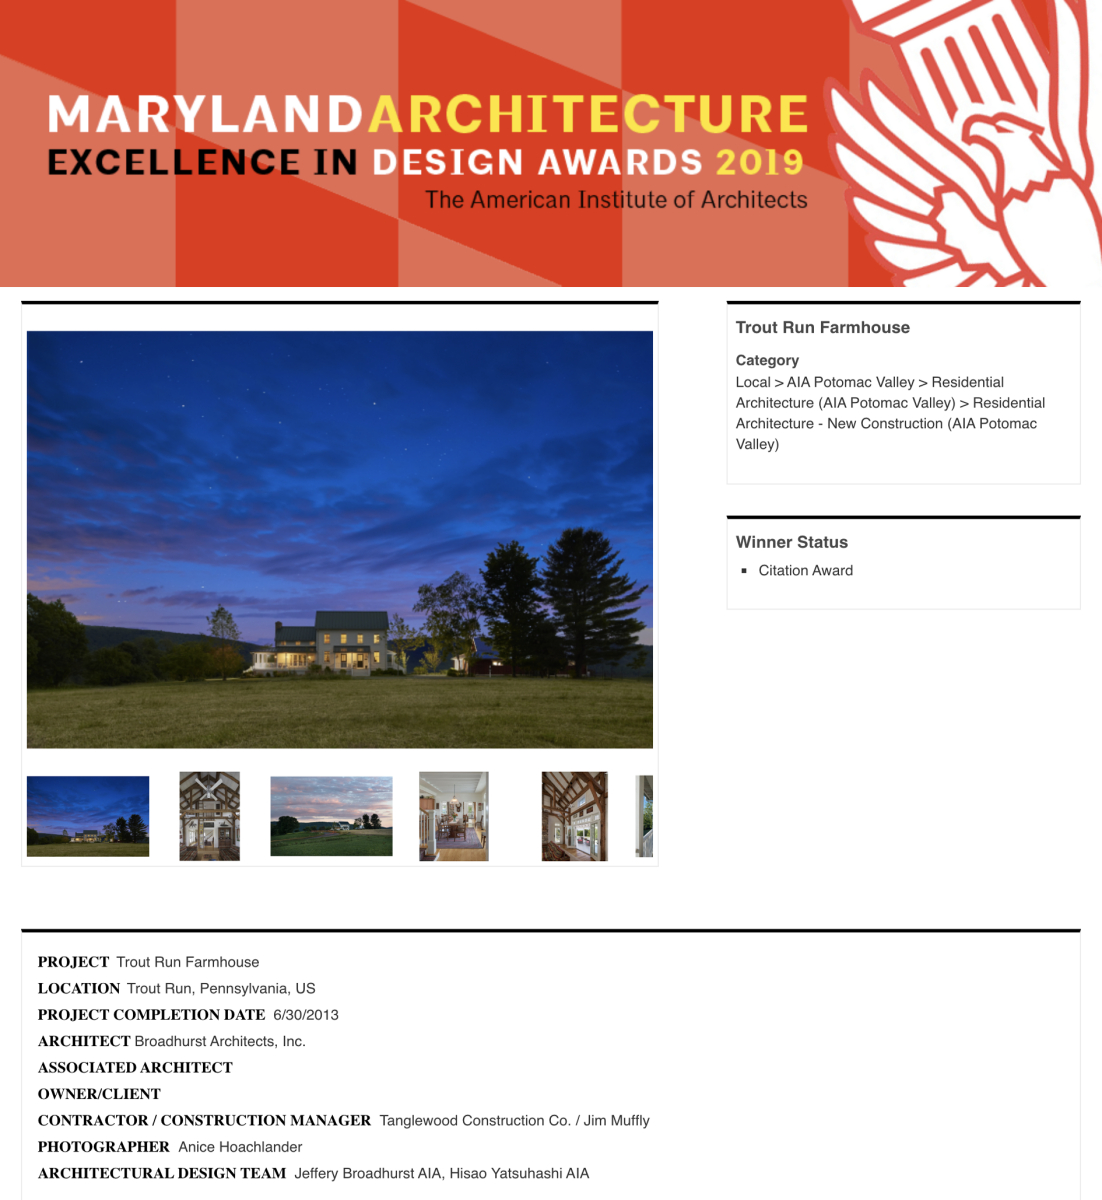 AIA of Potomac Valley 2017 Citation Award in Residential Architecture to Broadhurst Architects, Inc.